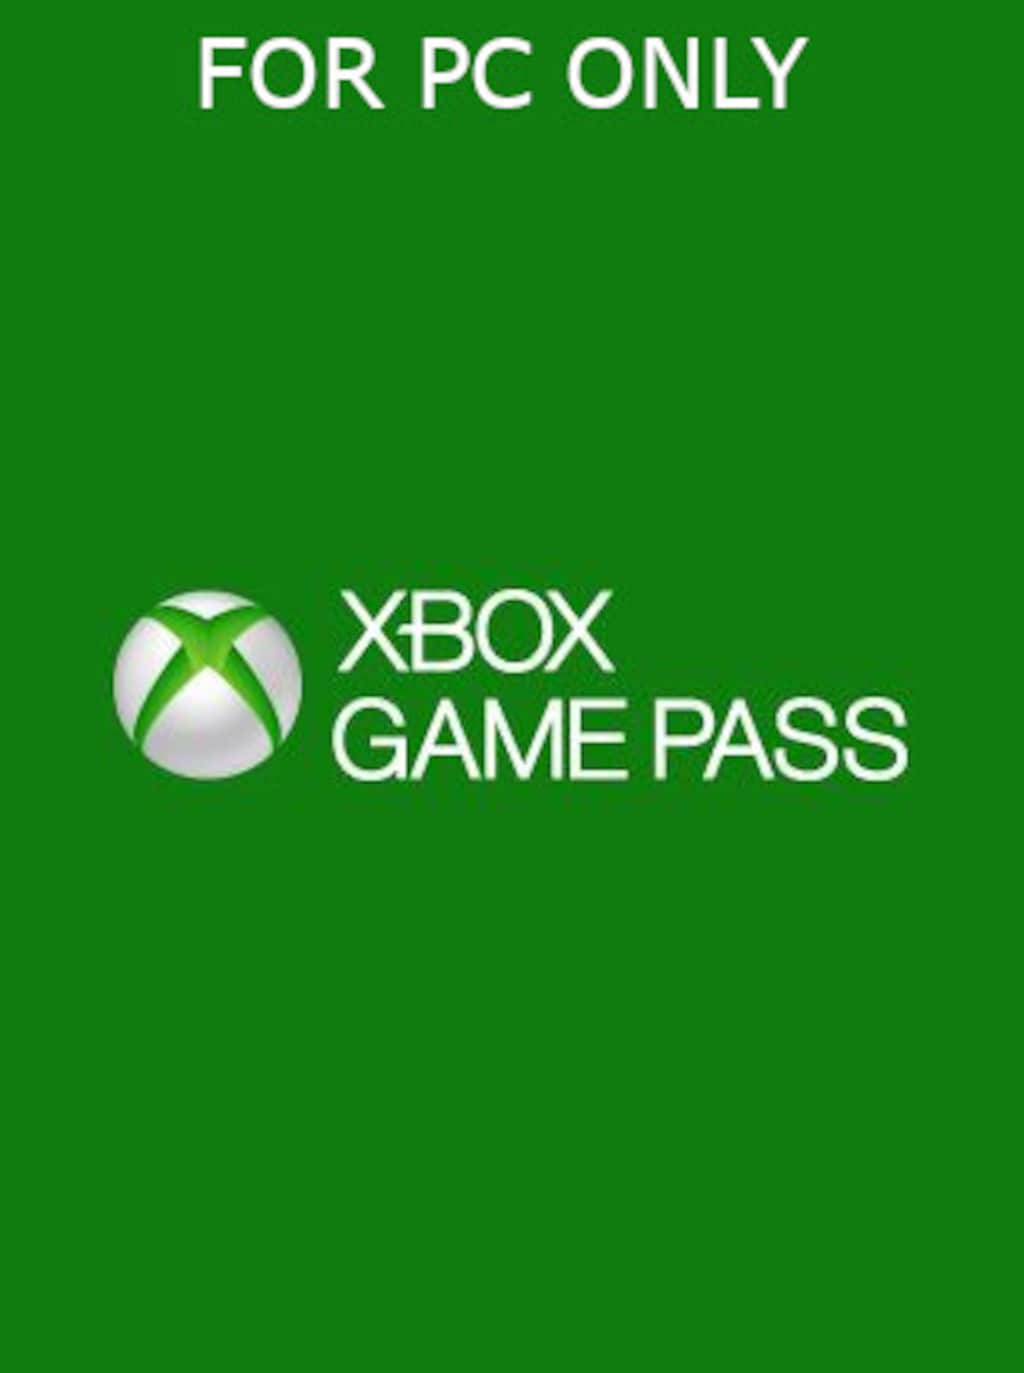 Xbox Game Pass subscriptions to receive a 28% price cut in India